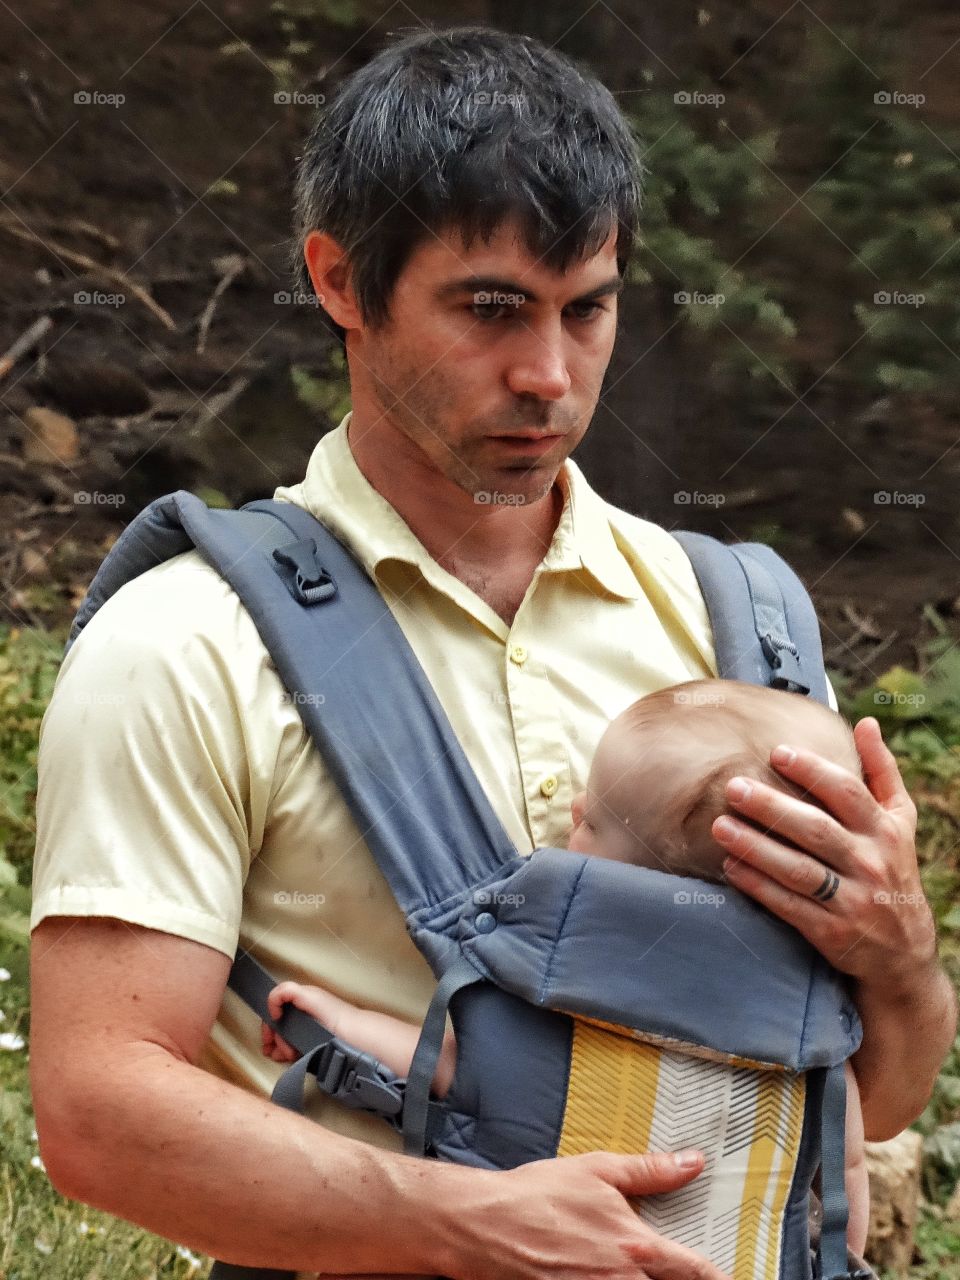 Young Father. New Father Holding His Baby In A Chest Sling
